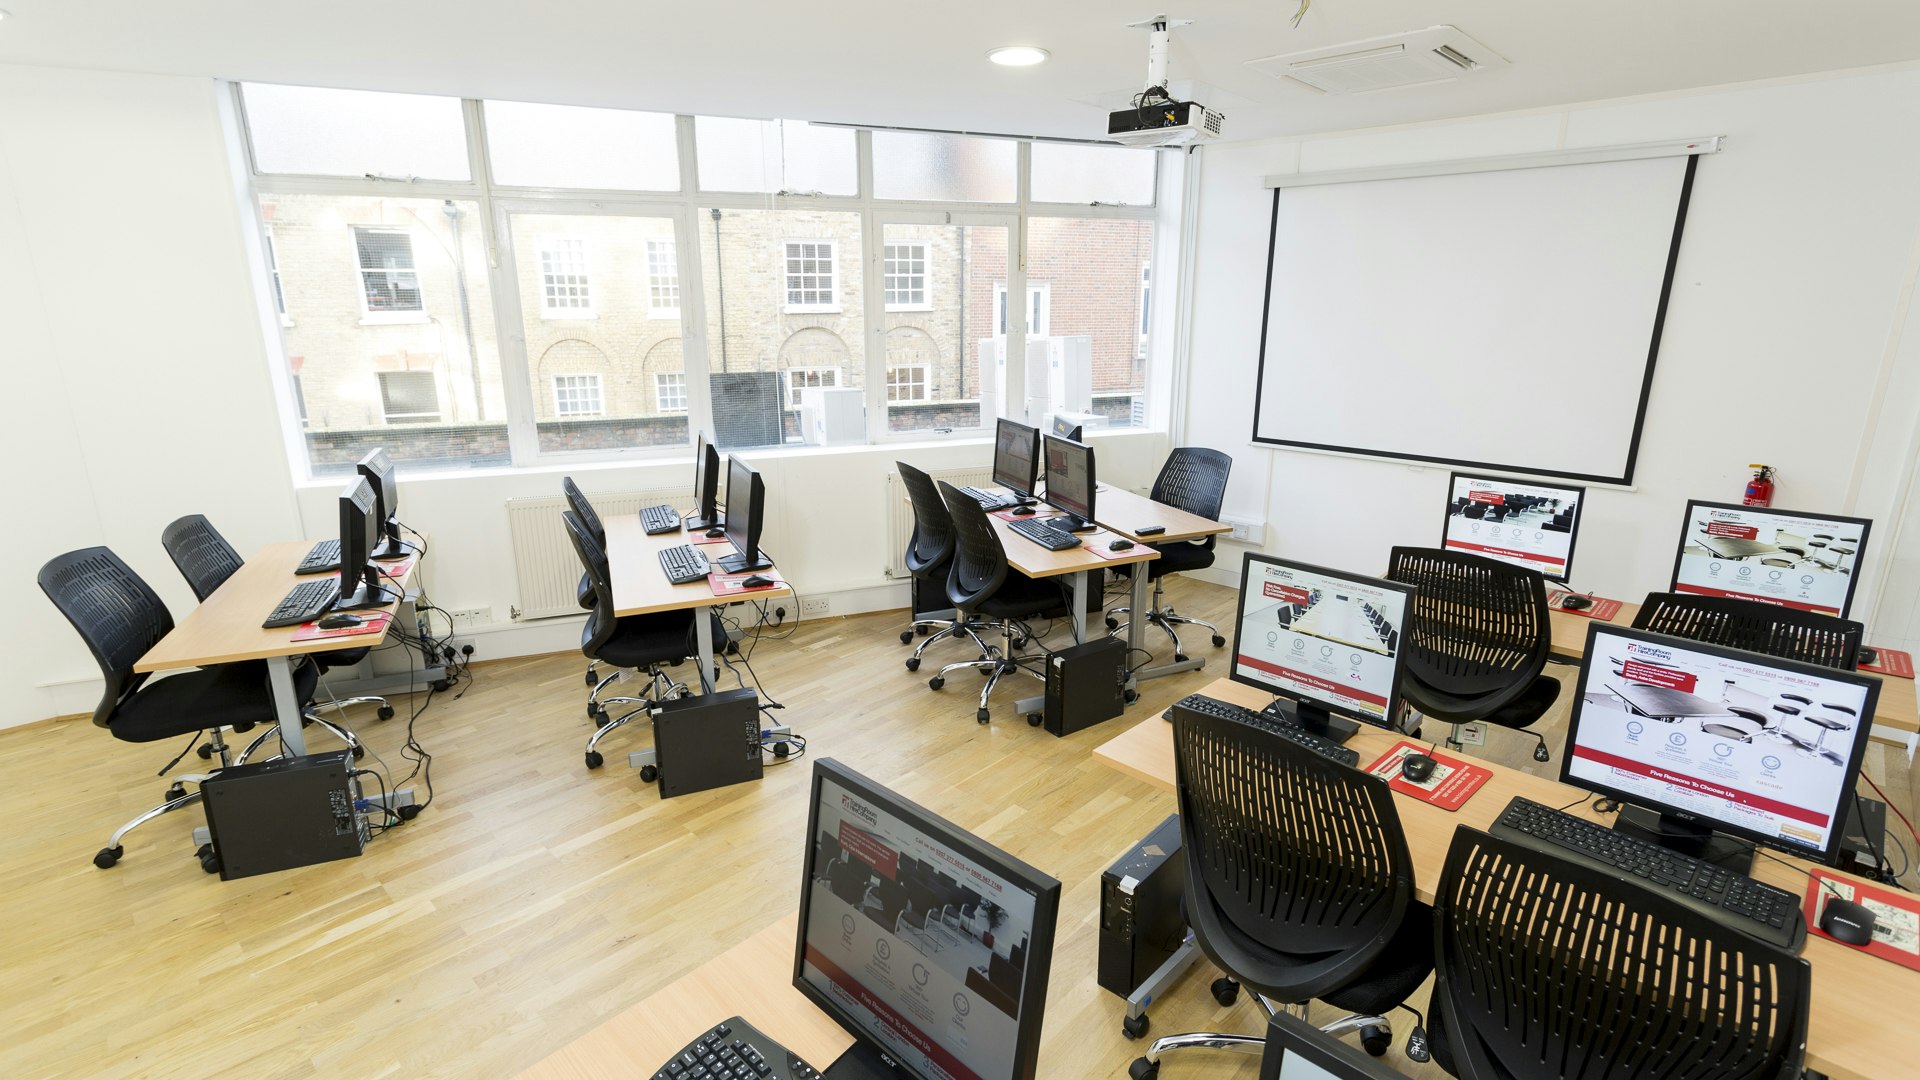 Training Rooms Venues in London - The Training Room Hire Company